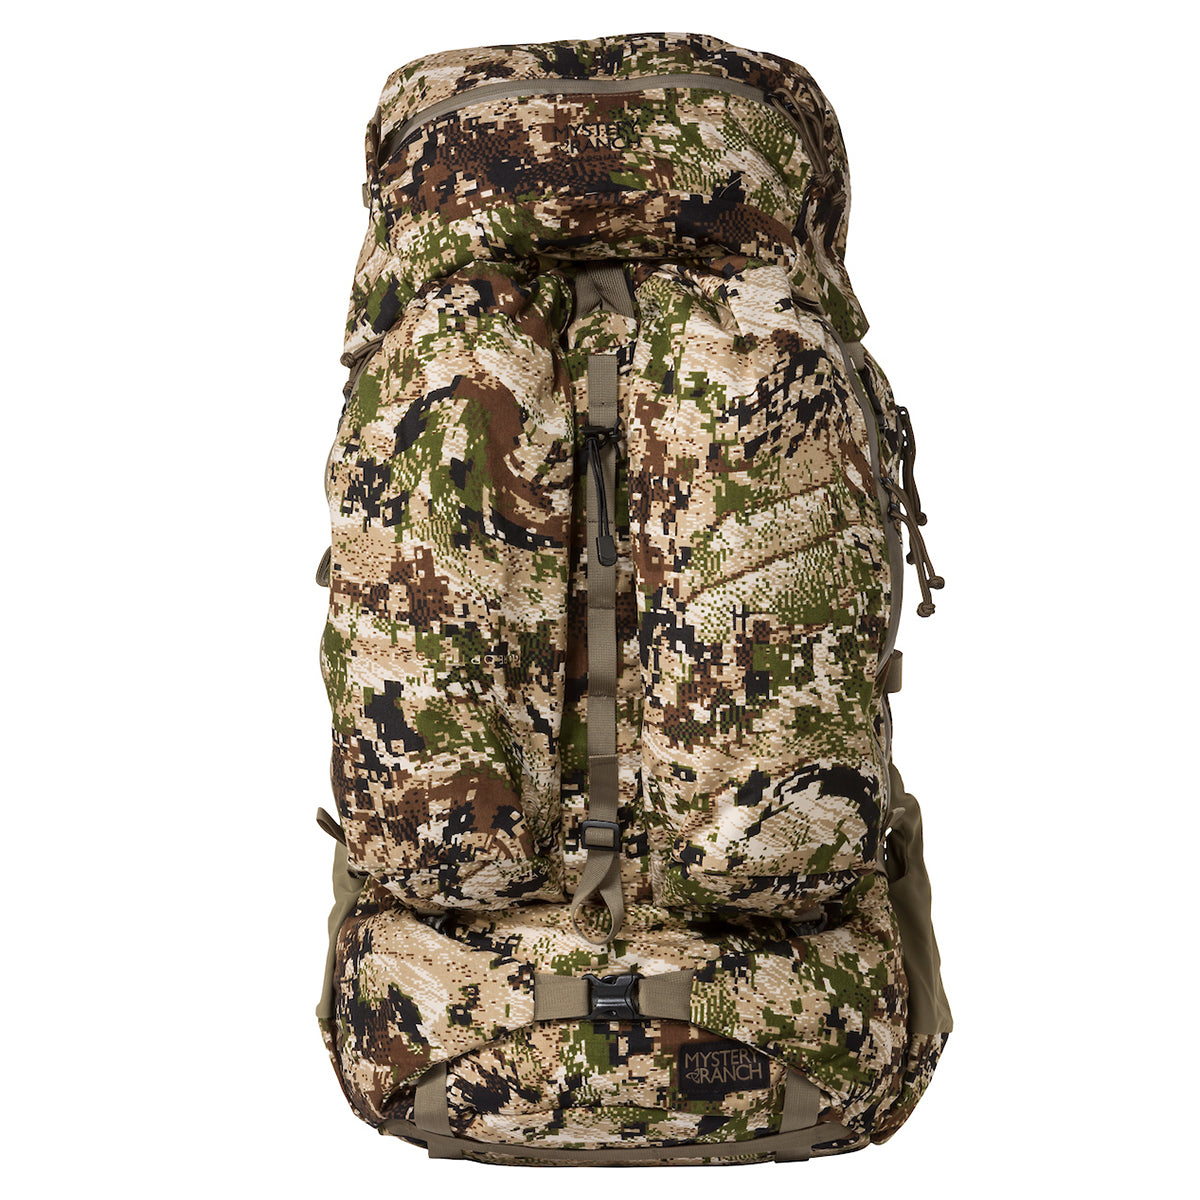 Mystery Ranch Marshall Backpack in Mystery Ranch Marshall Backpack (2020) by Mystery Ranch | Gear - goHUNT Shop by GOHUNT | Mystery Ranch - GOHUNT Shop